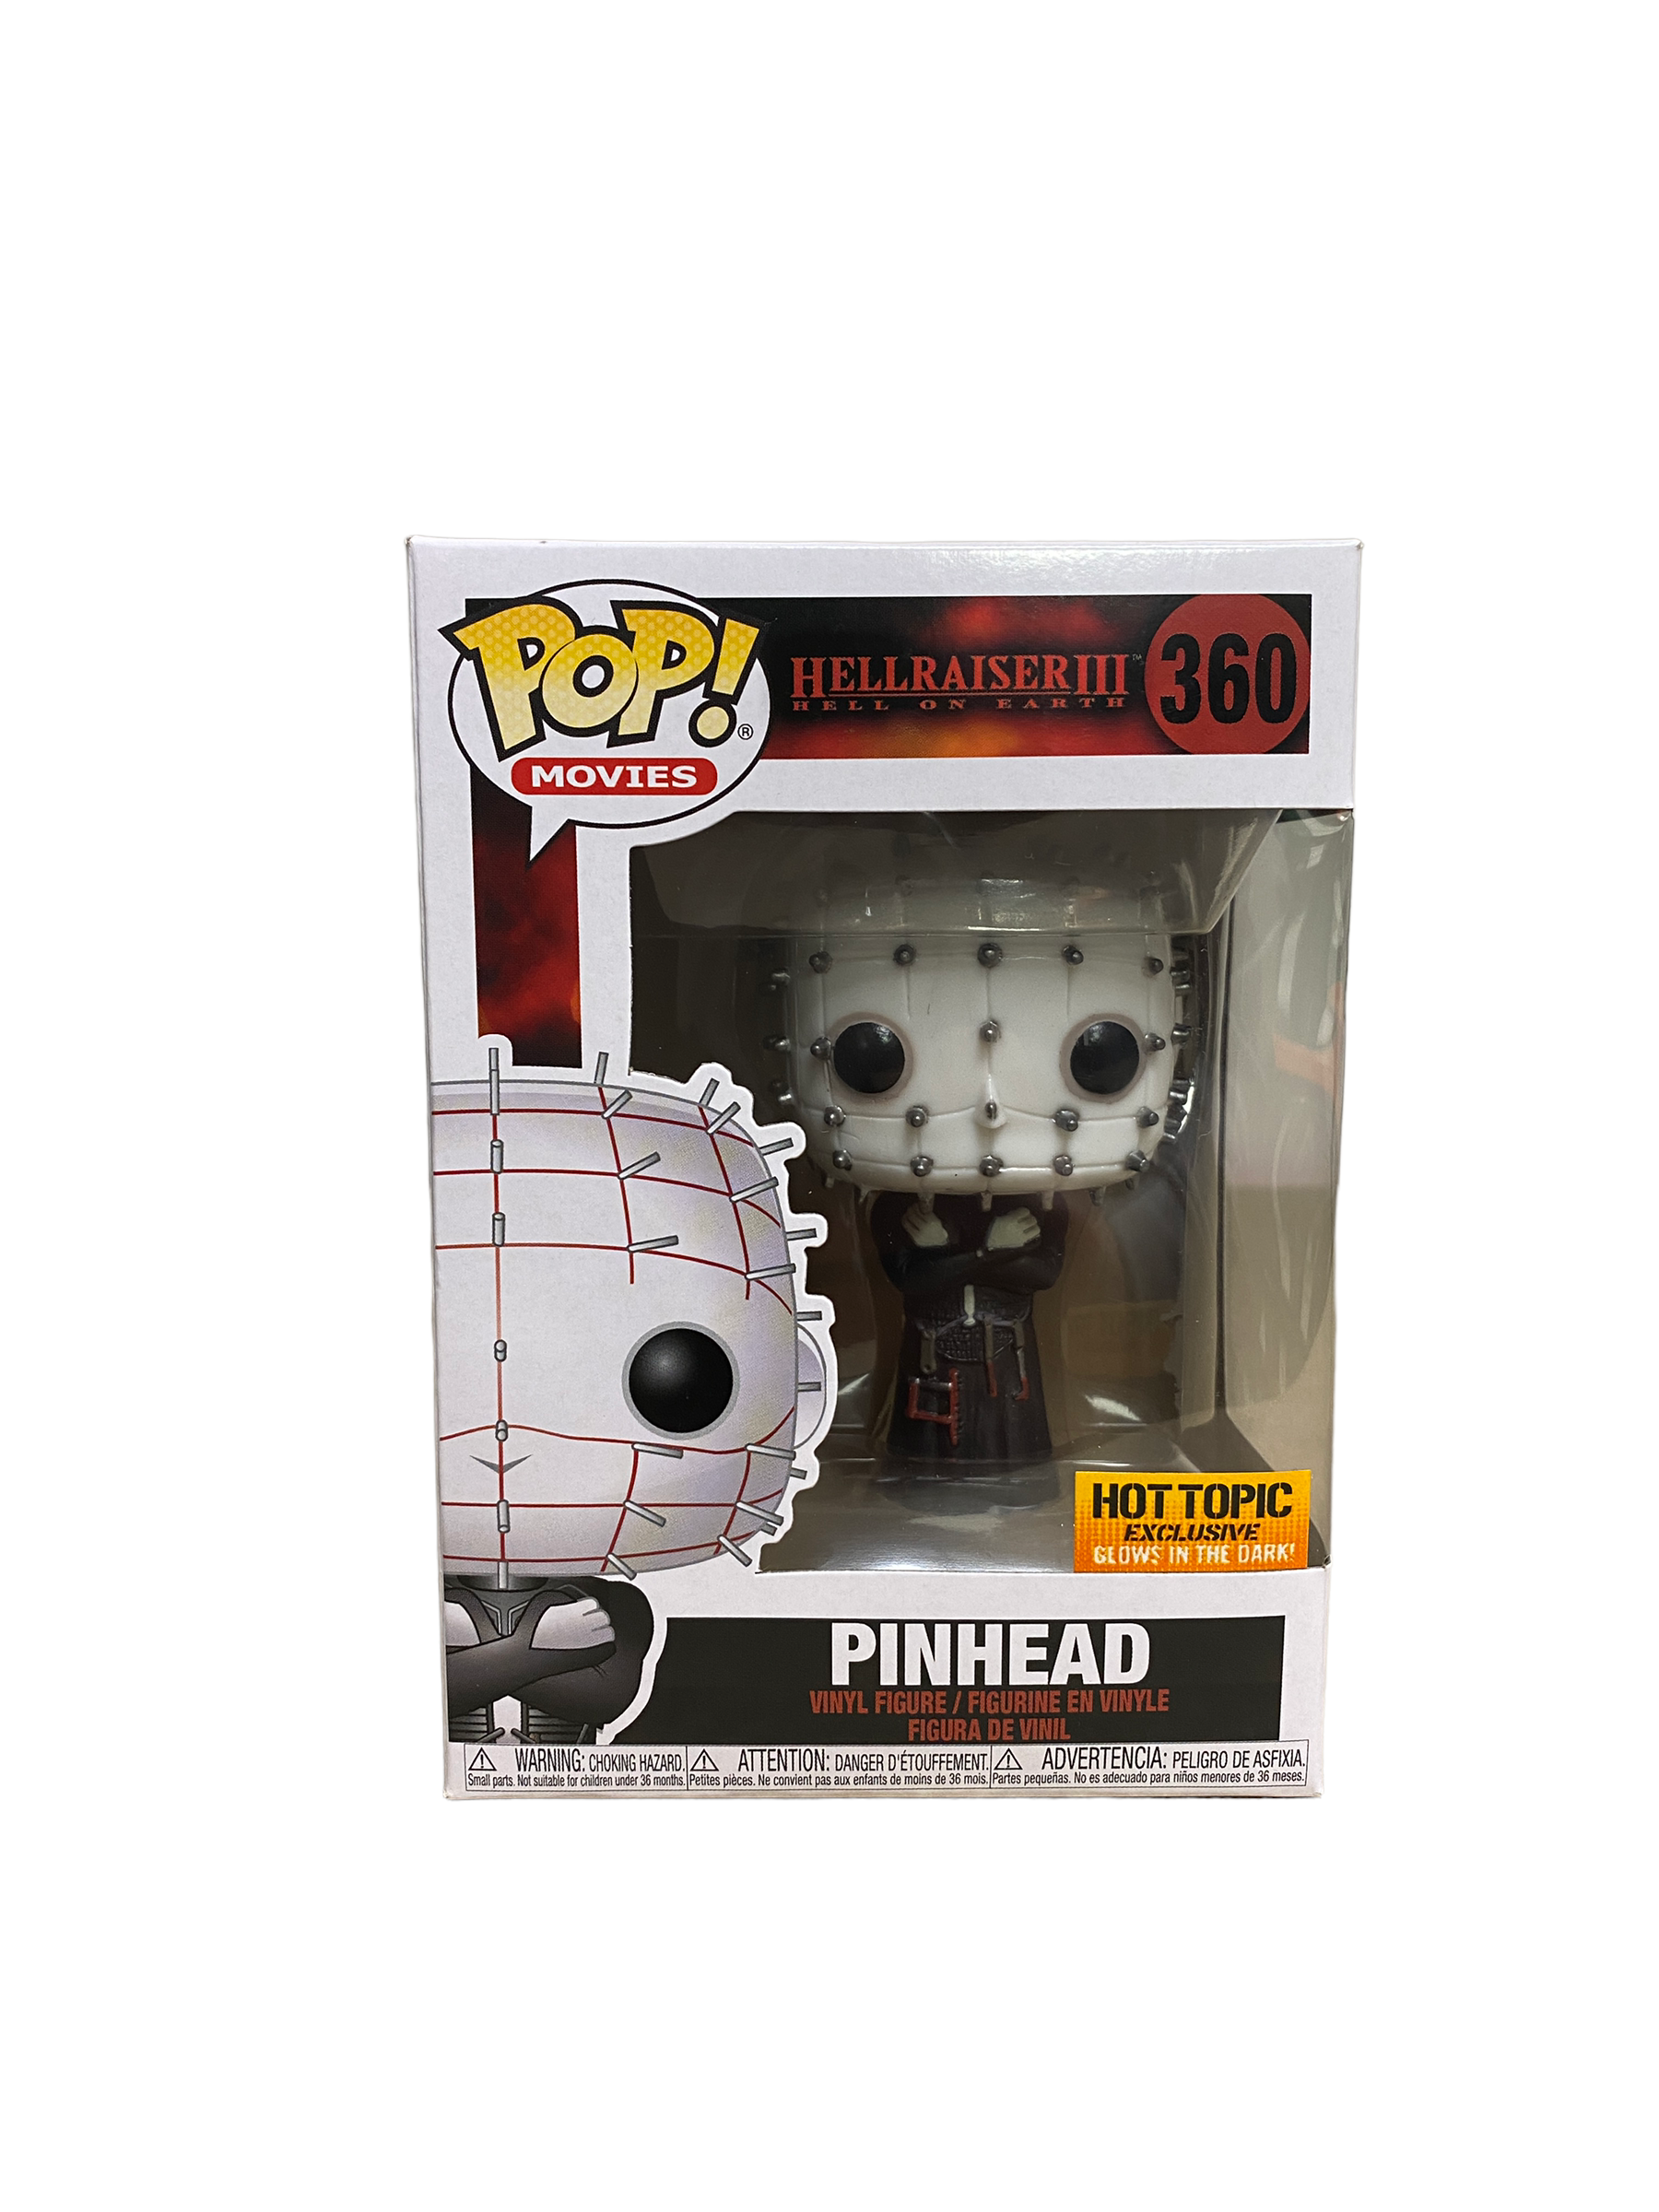 Pinhead #360 (Glows In The Dark) Funko Pop! - Hellraiser III Hell On Earth - 2020 Pop! - Hot Topic Exclusive - Condition 8.5/10